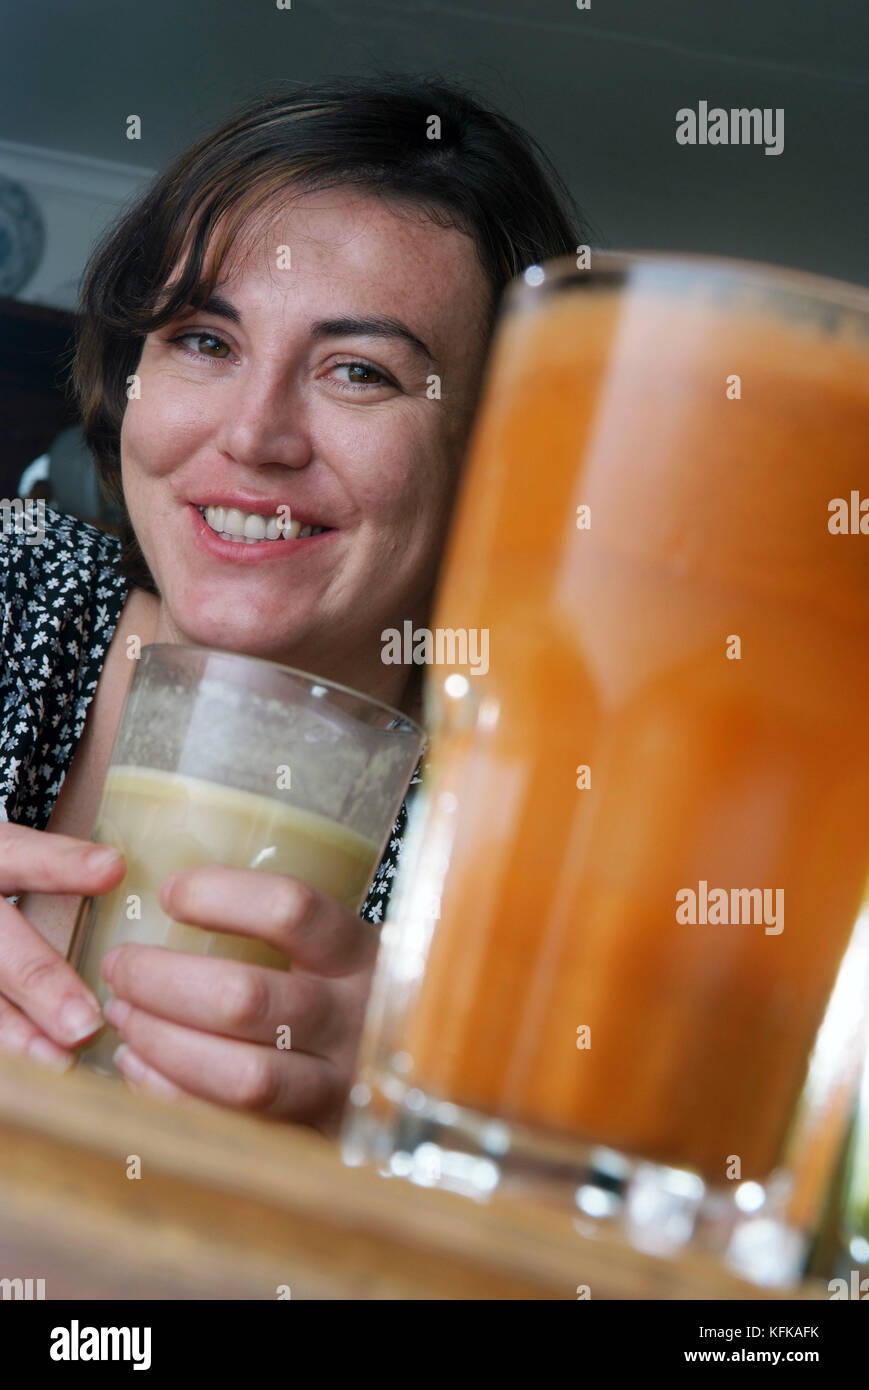 Laura Donnelly trying various juice drinks at the Middle Piccadilly Spa Retreat & Wellness Centre, Sherborne, Dorset, UK Stock Photo